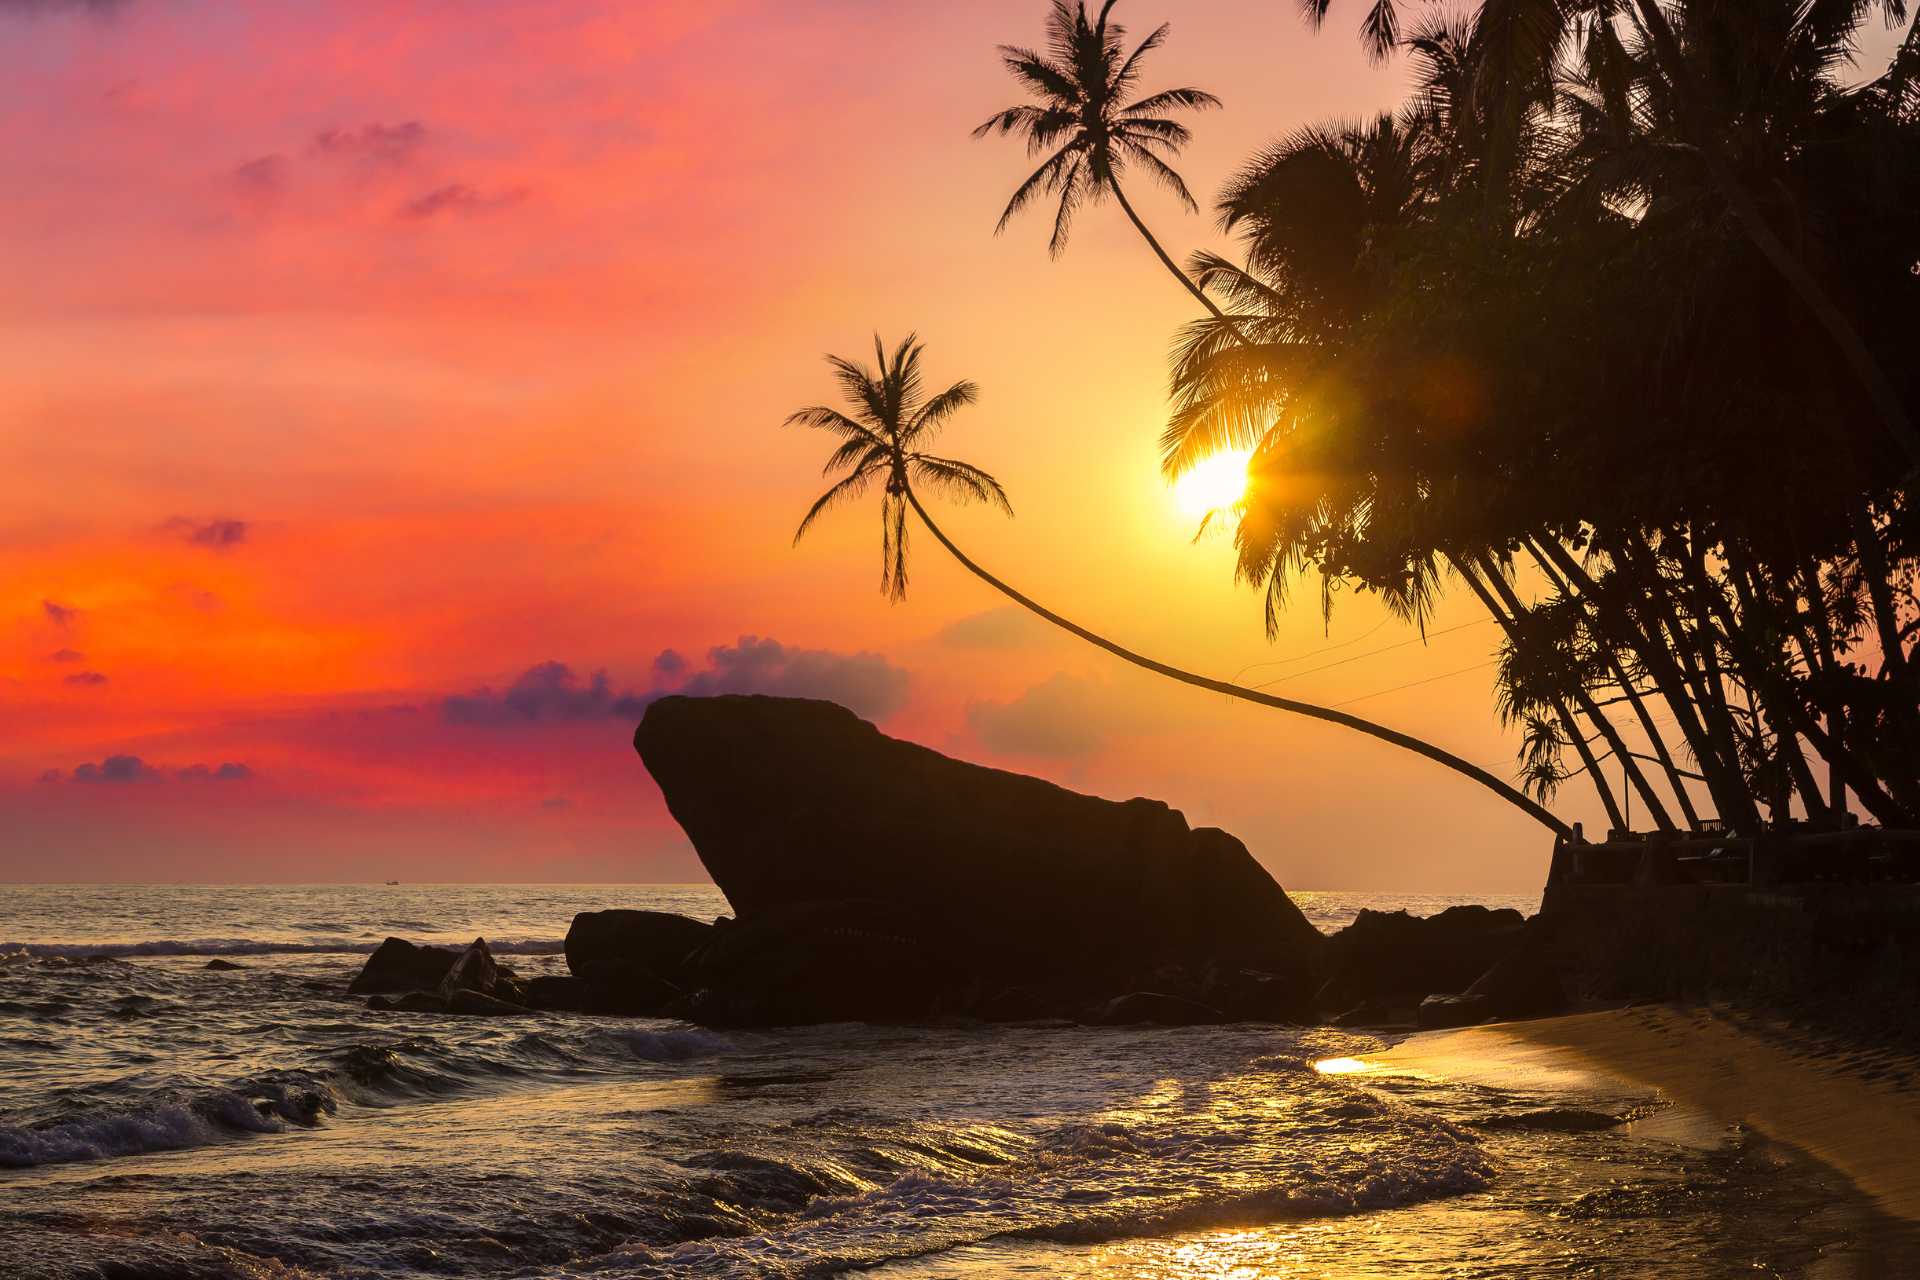 Sunset at Dalawella Beach near Galle, with beach, sea, palm trees and rocky outcrops.